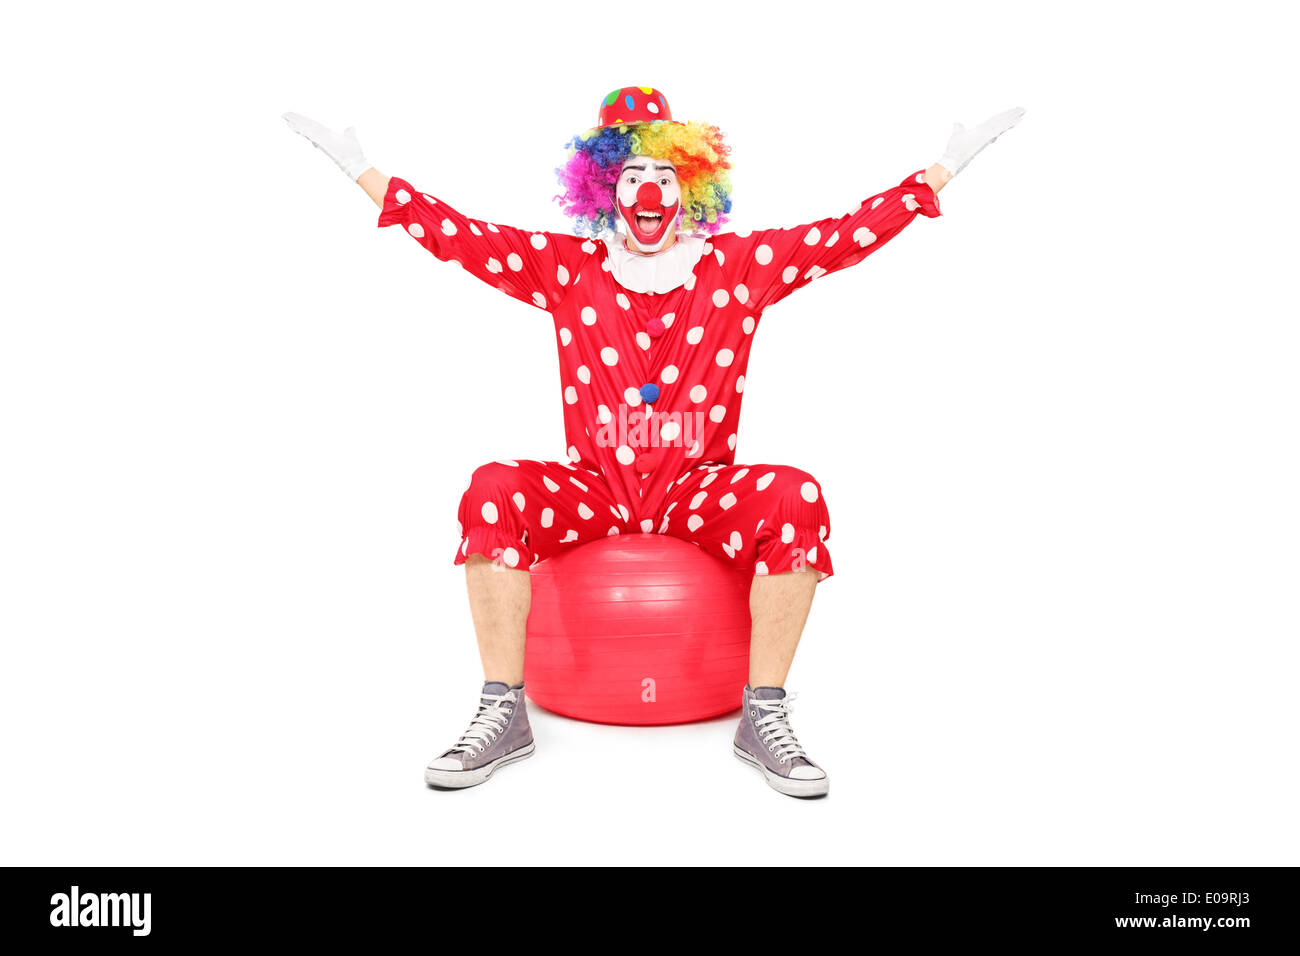 Overjoyed clown sitting on a fitness ball Stock Photo